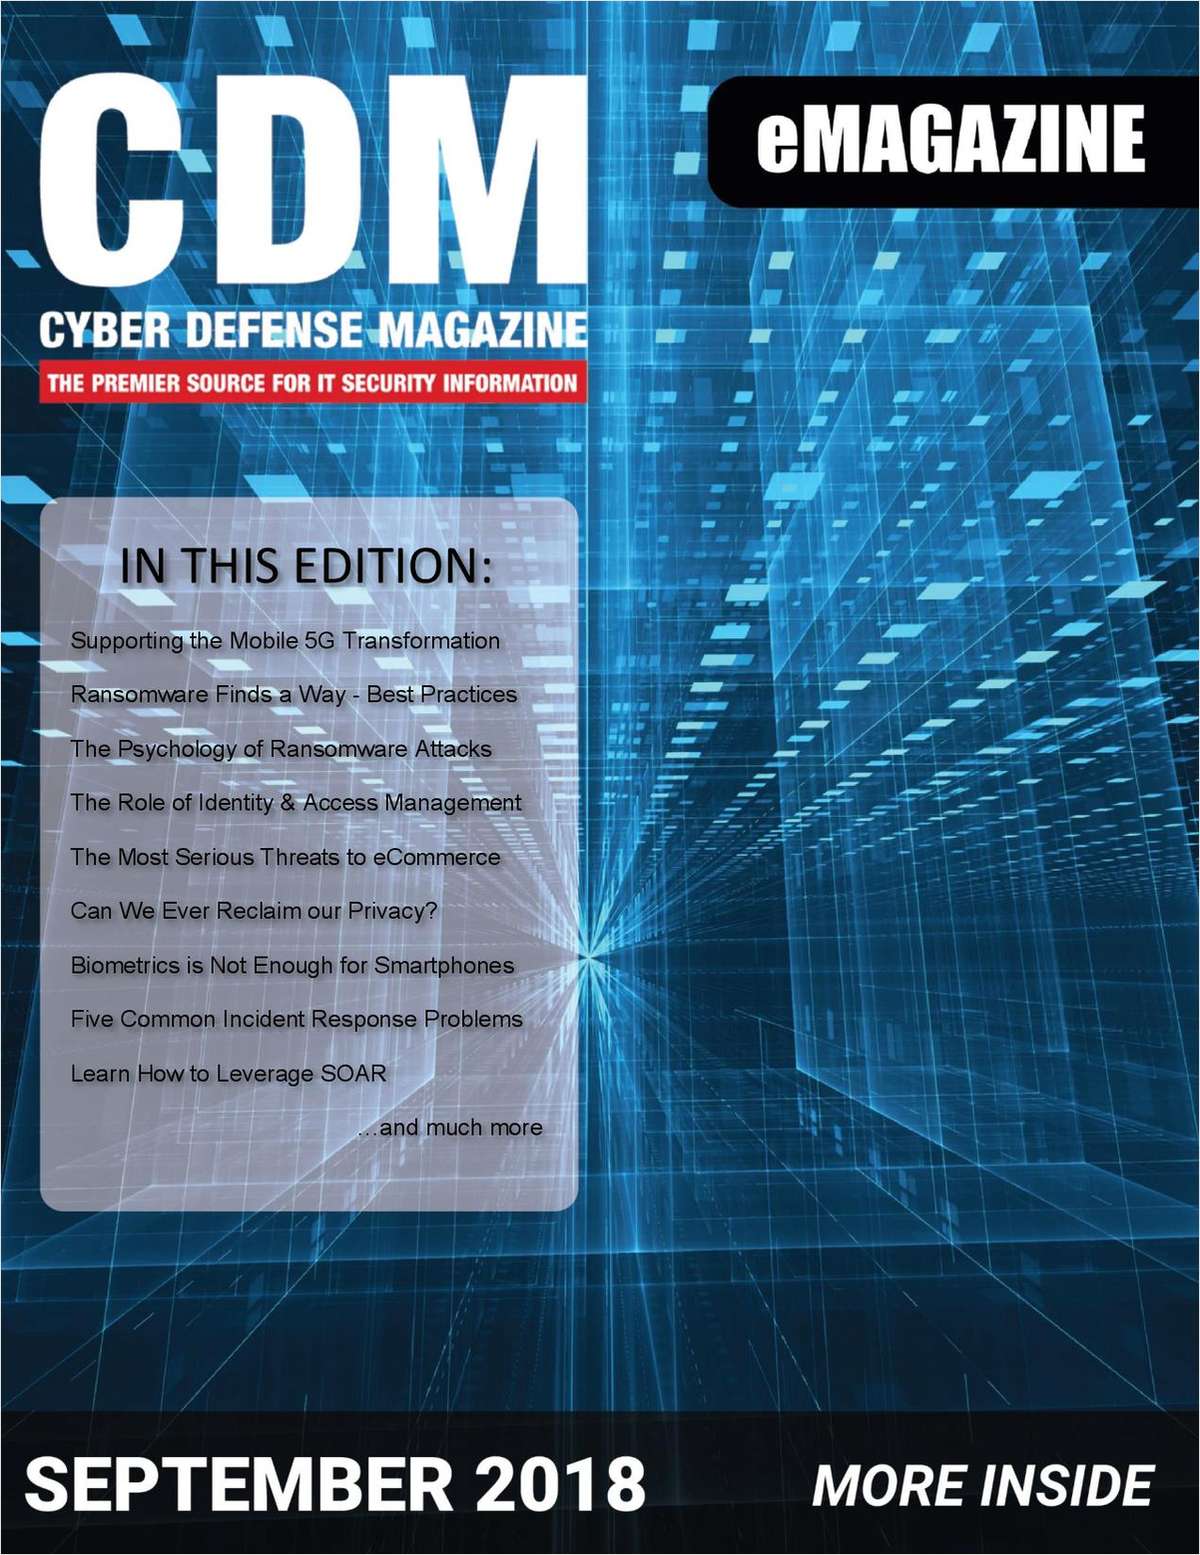 Cyber Defense eMagazine - Supporting the Mobile 5G Transformation - September 2018 Edition